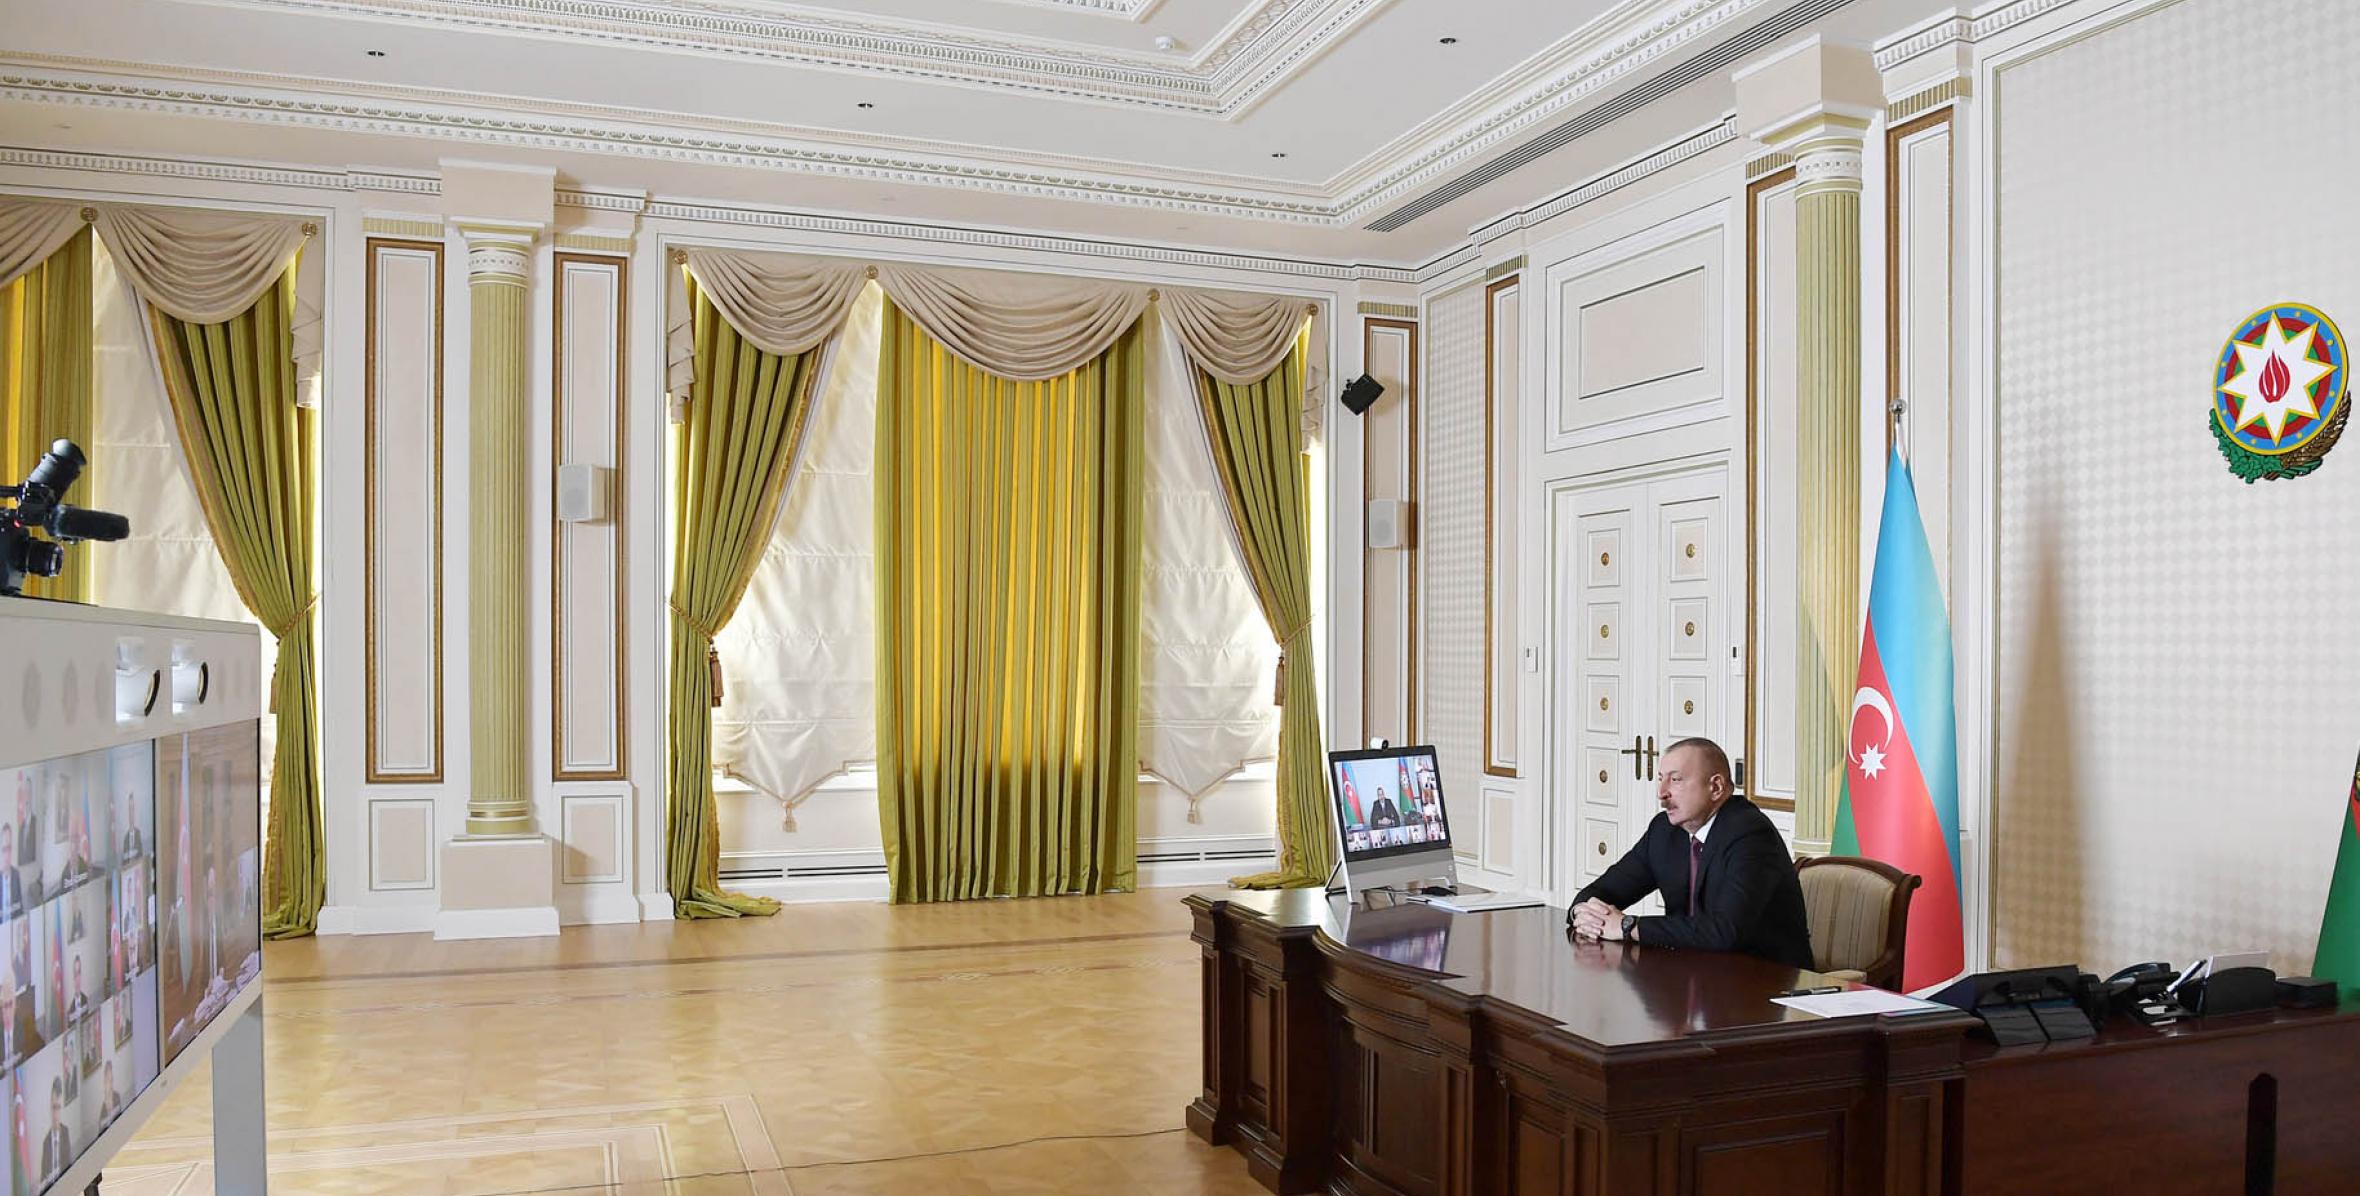 Opening speech by Ilham Aliyev at the meeting on the socio-economic results of the first quarter of 2020 through videoconference.